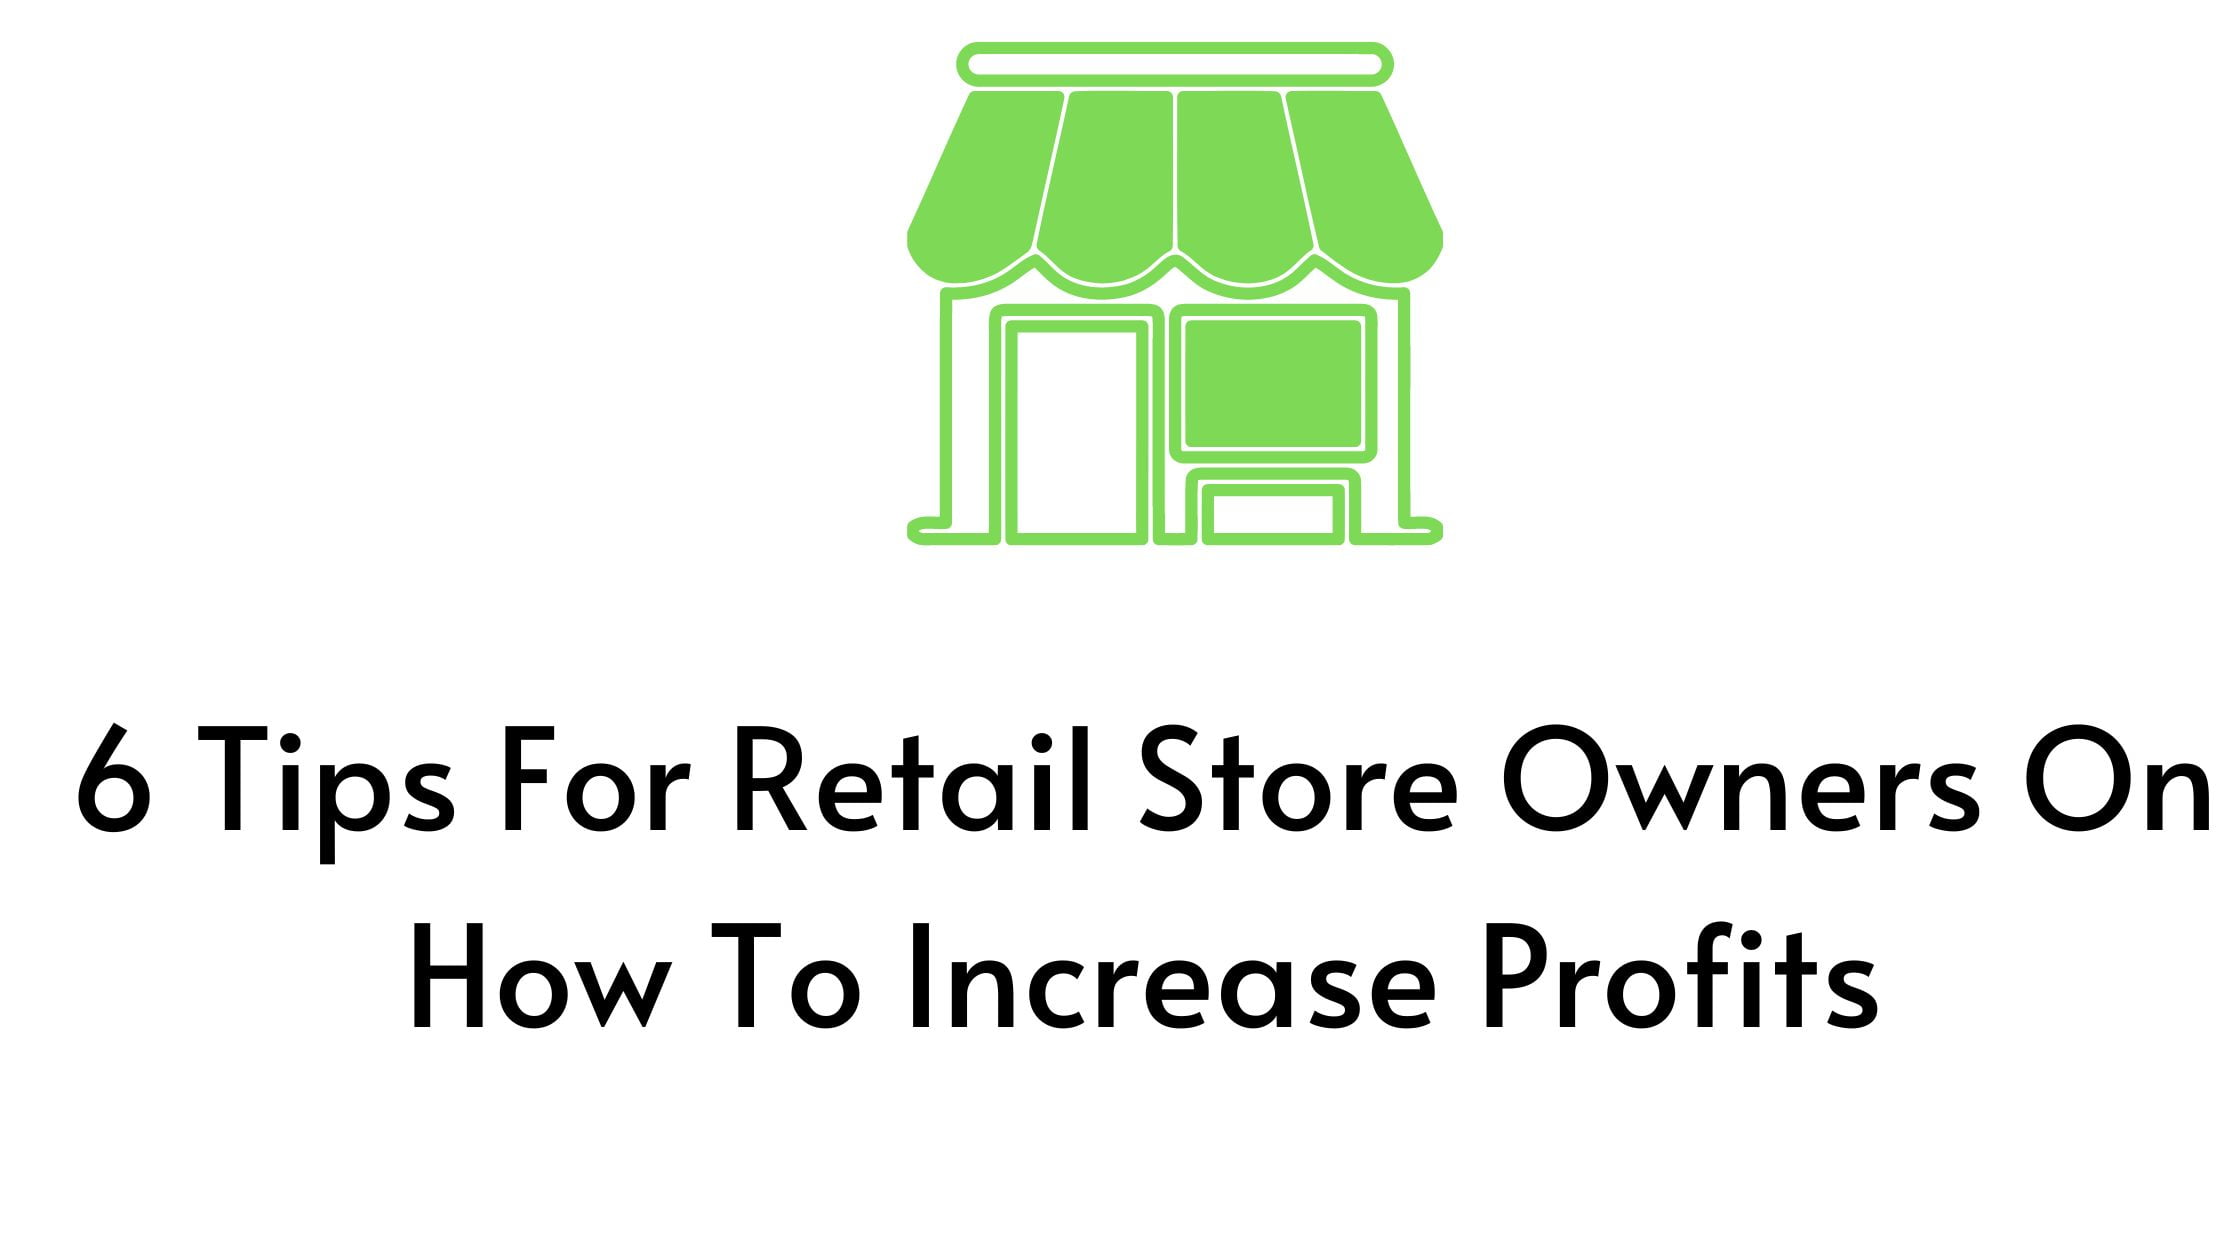 6 Tips For Retail Store Owners On How To Increase Profits